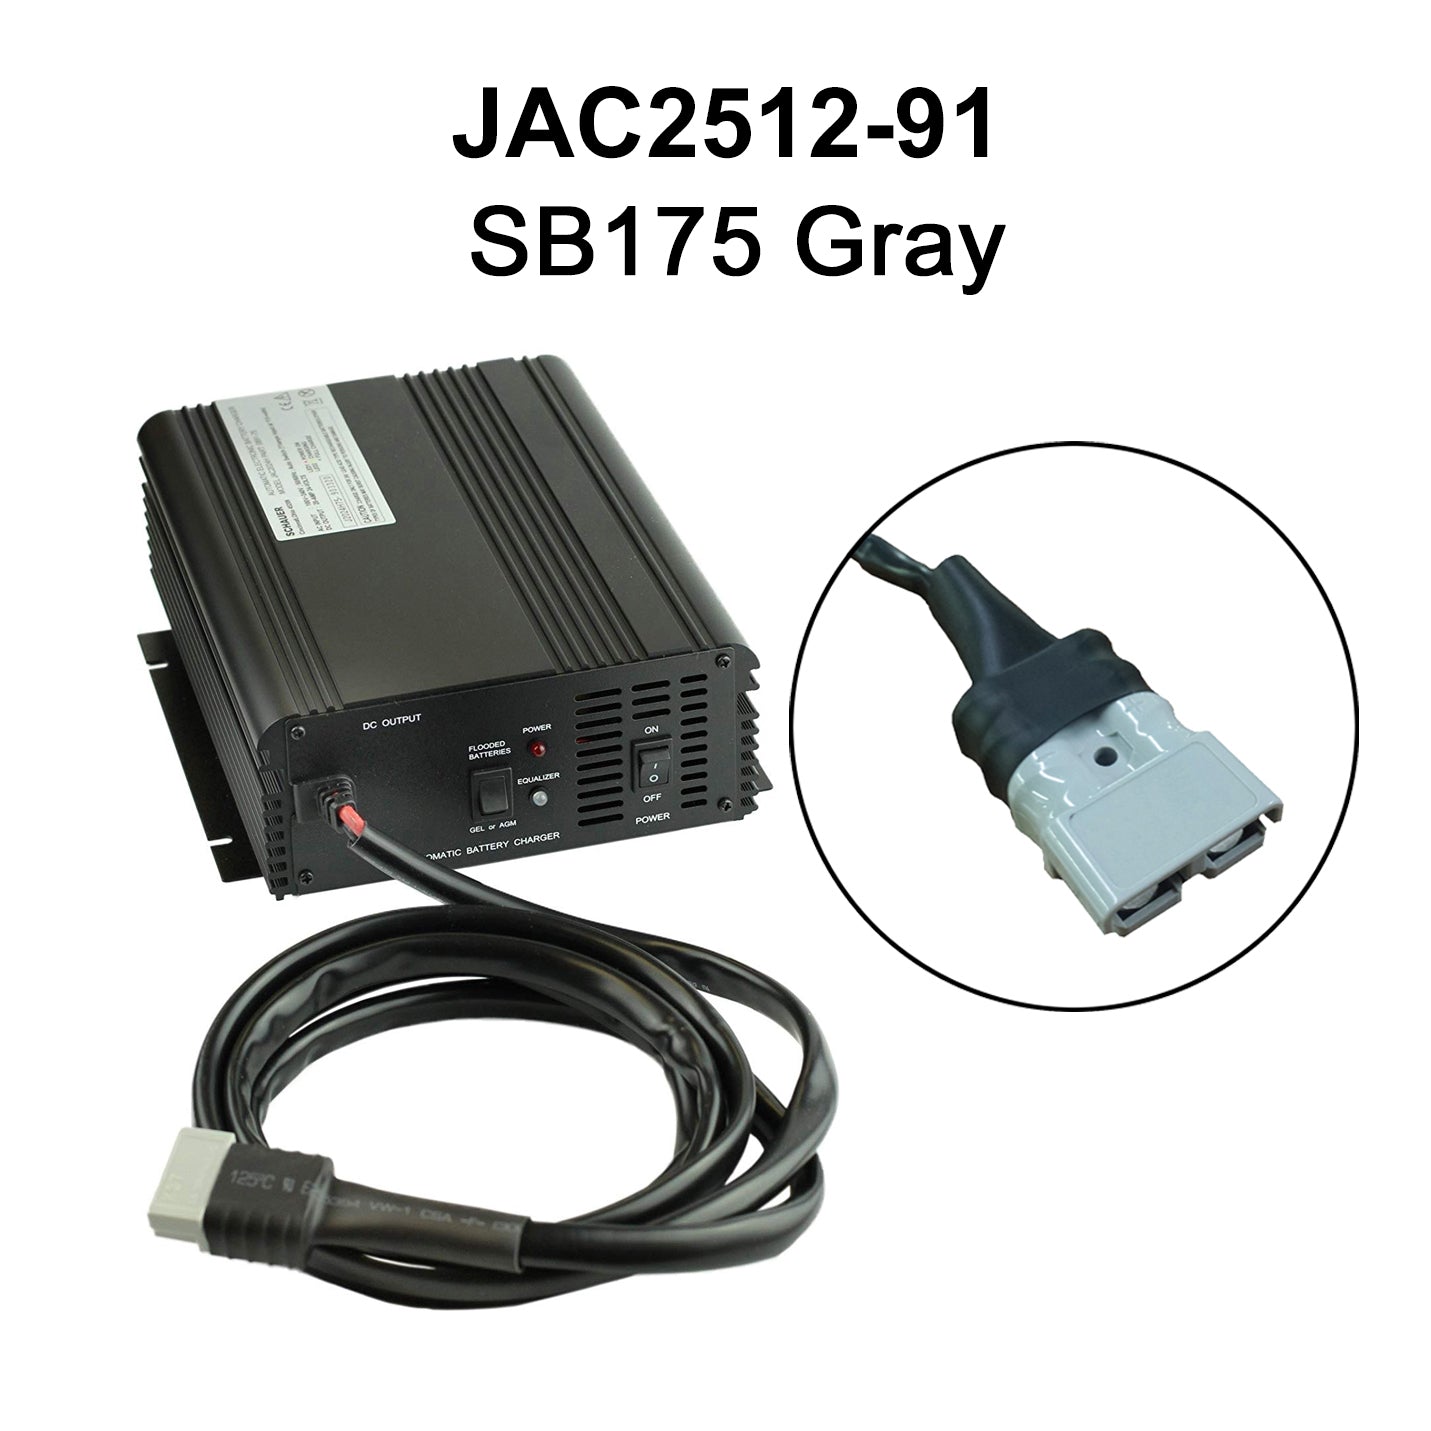 JAC2512 - Schauer 12V, 25A Fully Automatic Electronic Charger/Maintainer - Auto-Sensing 120/240VAC - Includes Choice of DC Connector